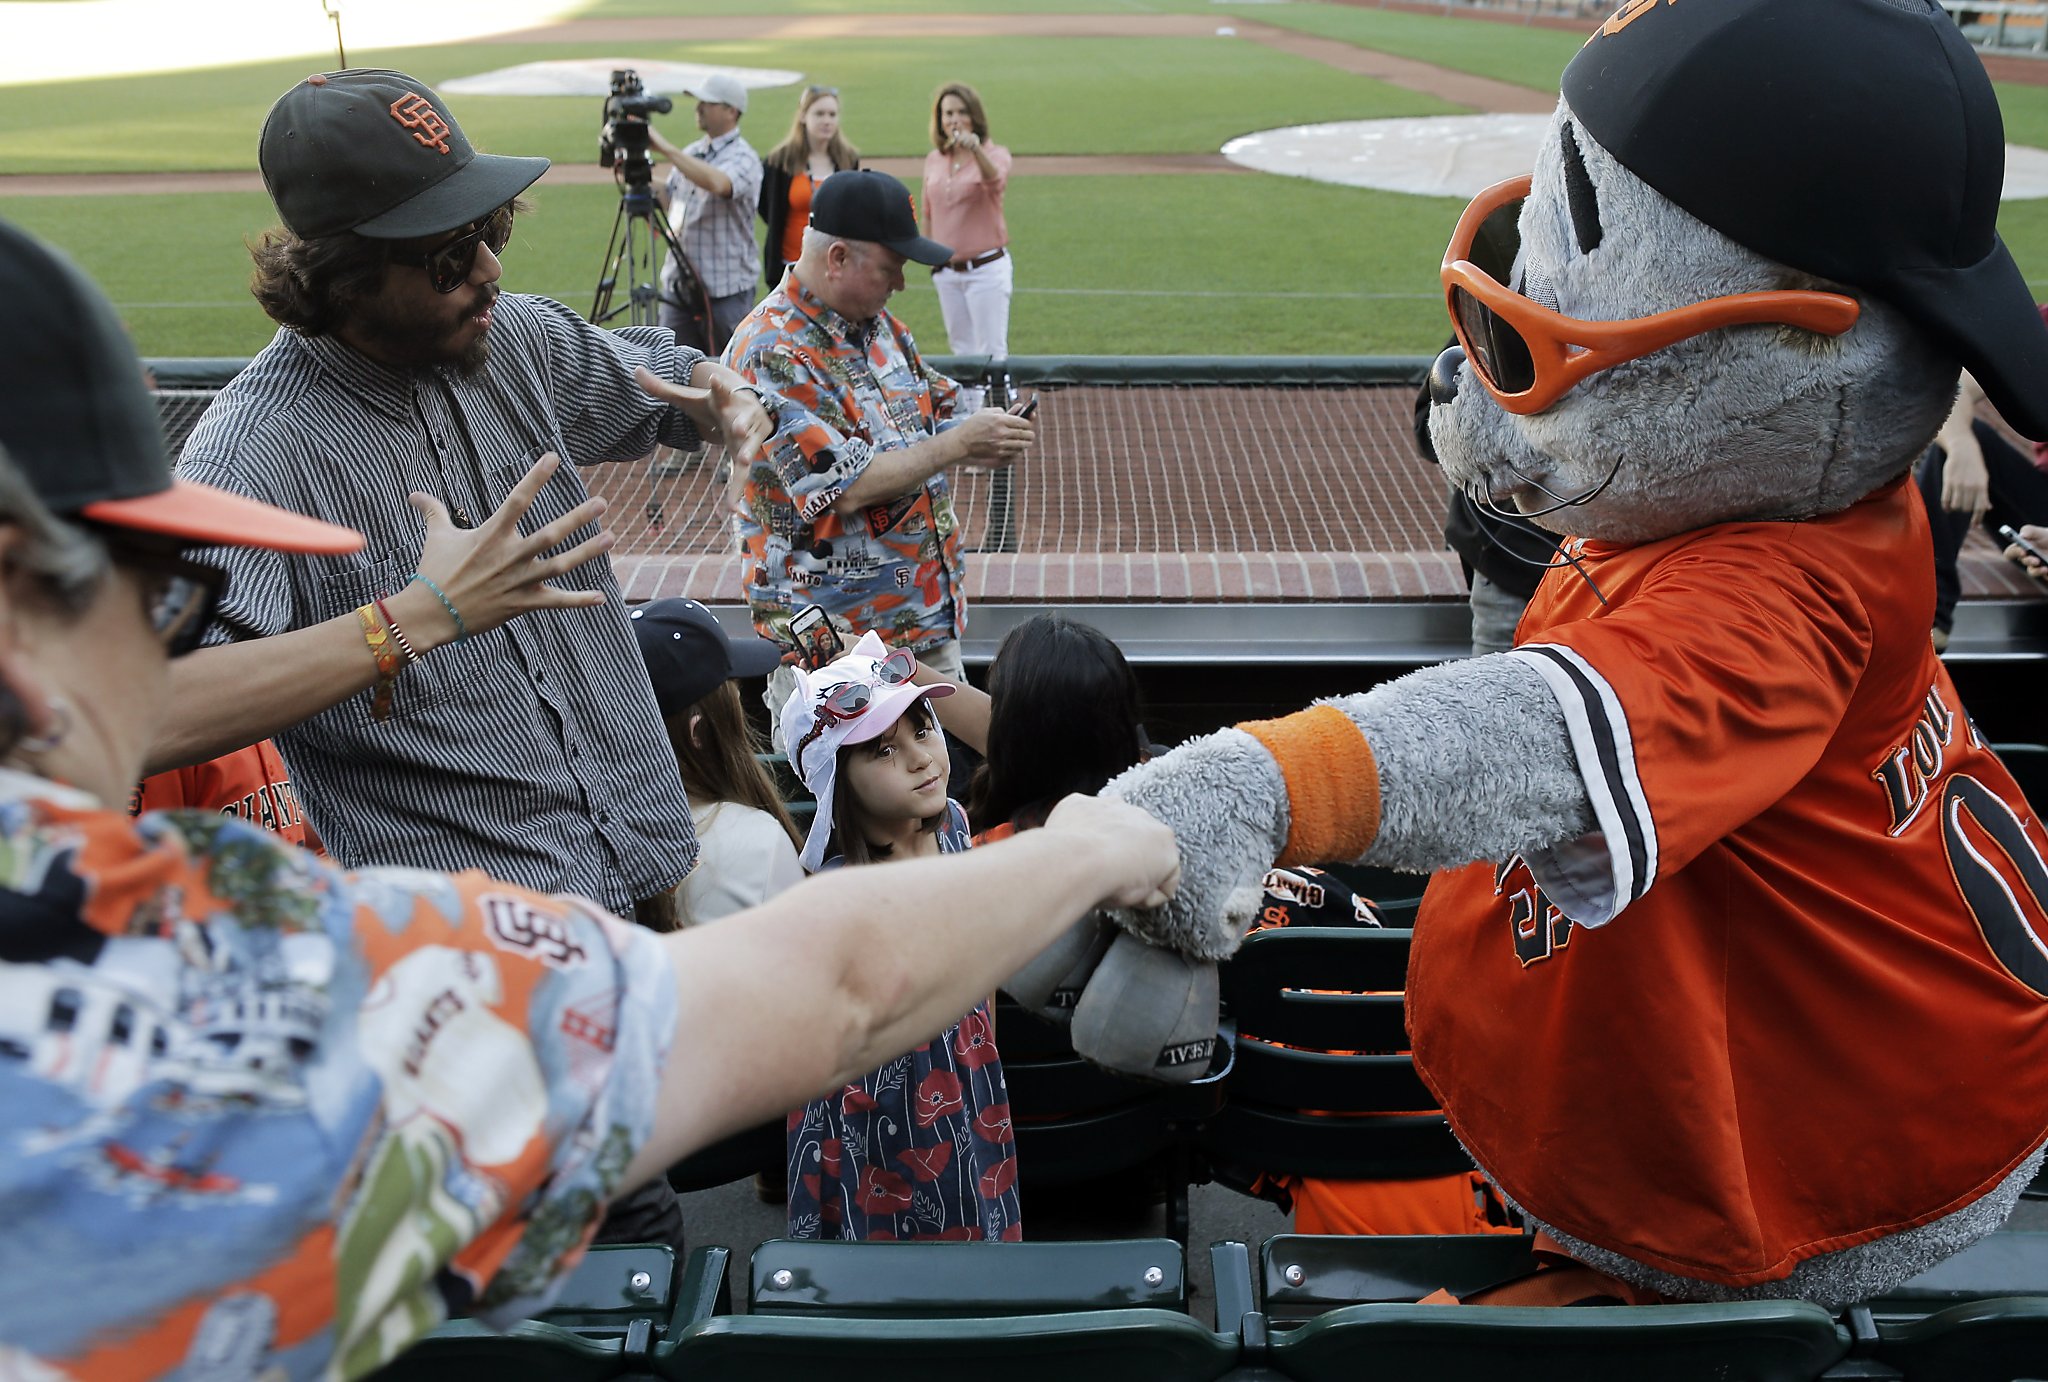 Giants' Lou Seal mascot makes it 13 straight years - Deseret News